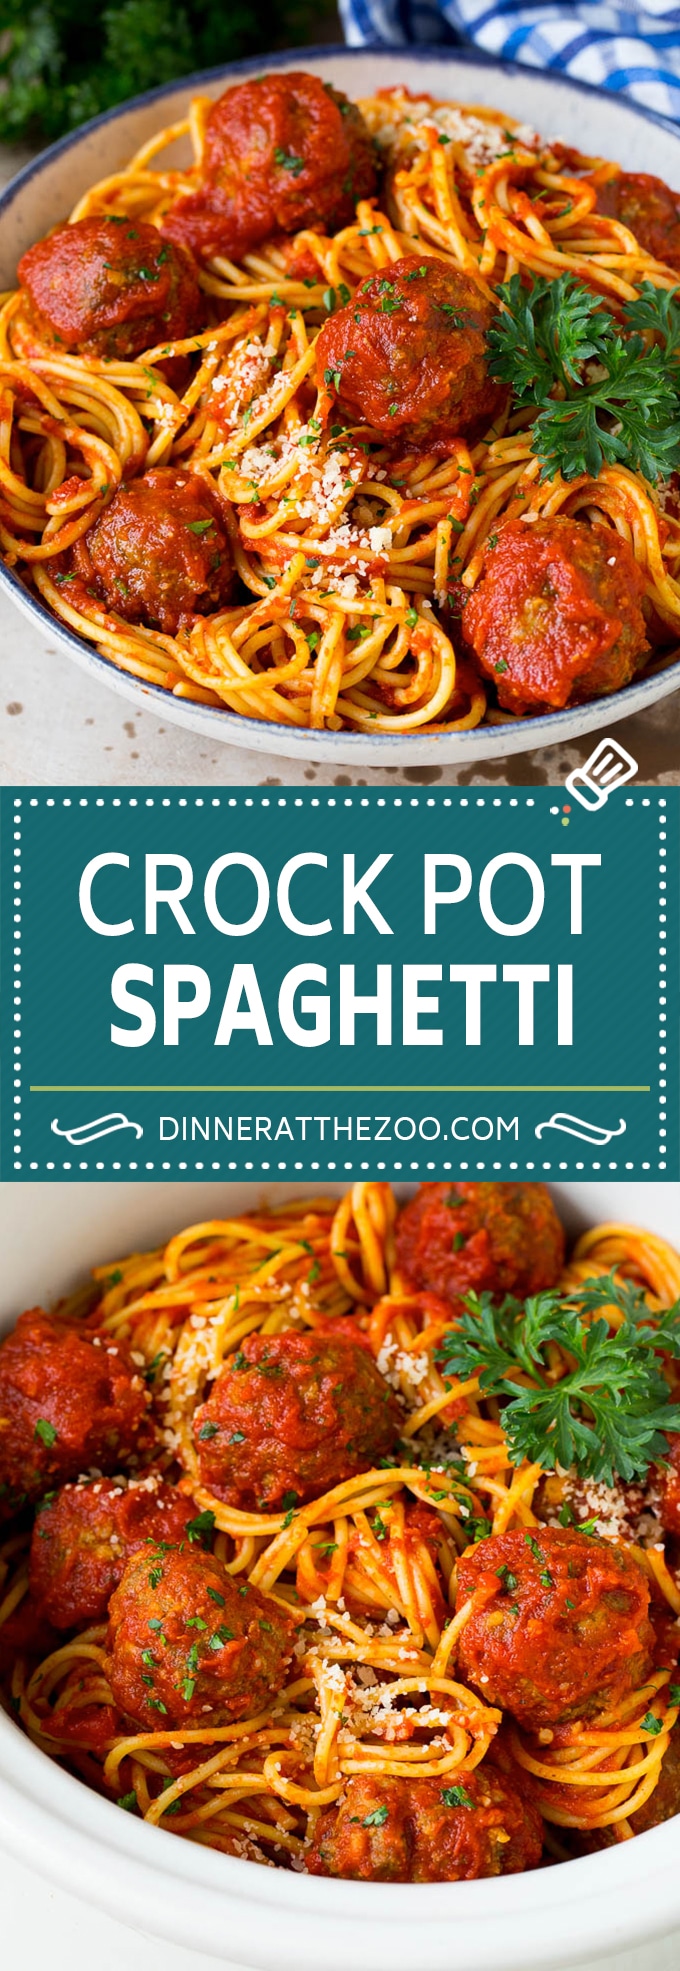 This crock pot spaghetti is homemade beef meatballs that are simmered in tomato sauce, then tossed with spaghetti to make an easy meal. 